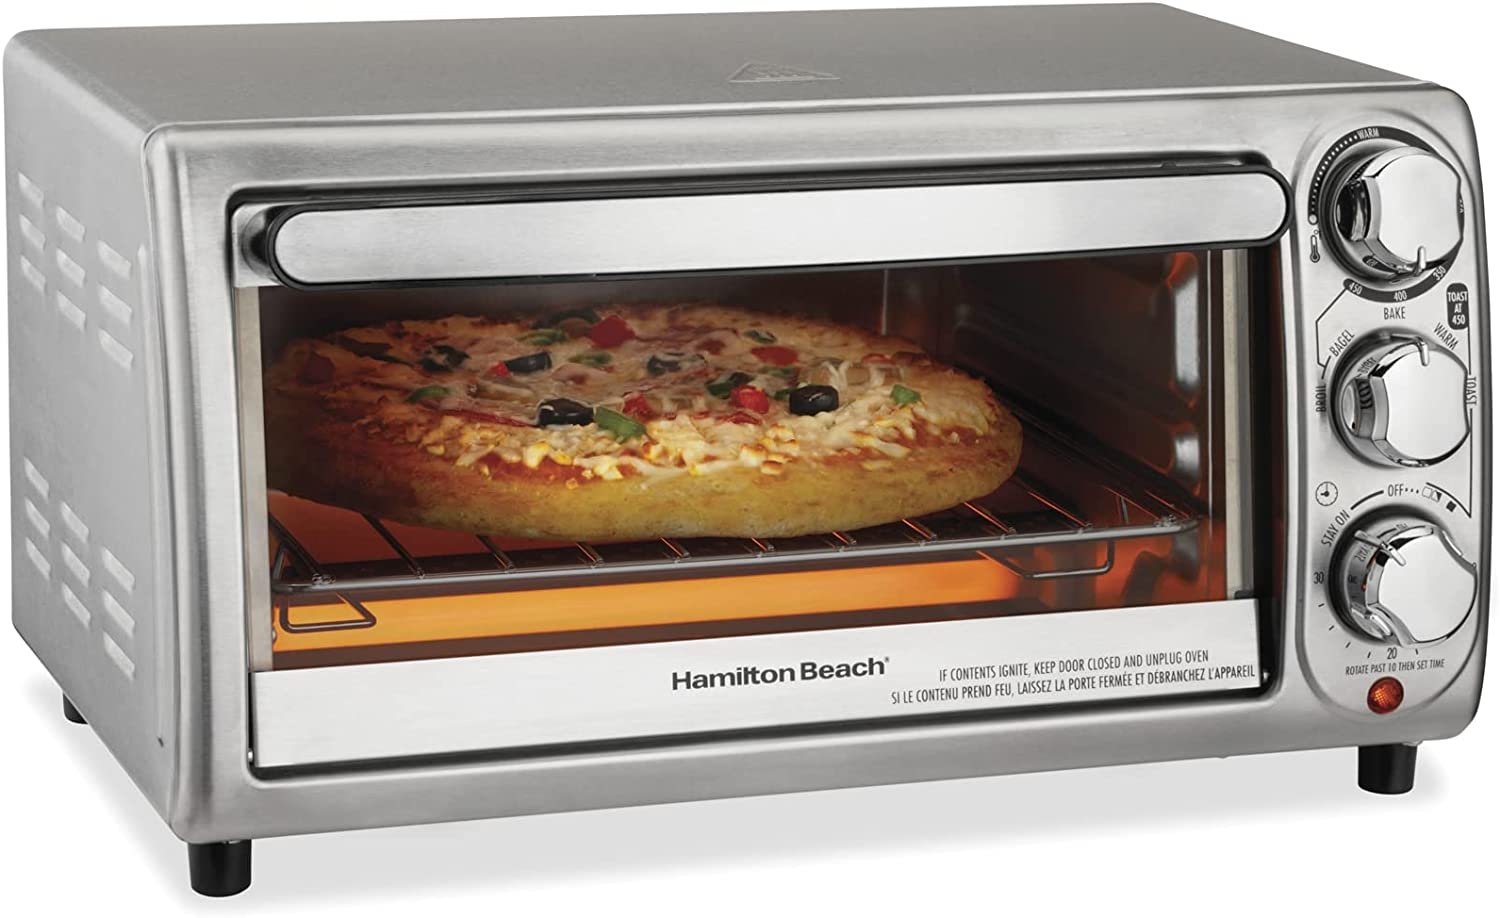 Hamilton Beach 4-Slice Countertop Toaster Oven with Bake Pan, Stainless Steel (31143) Import To Shop ×Product customization